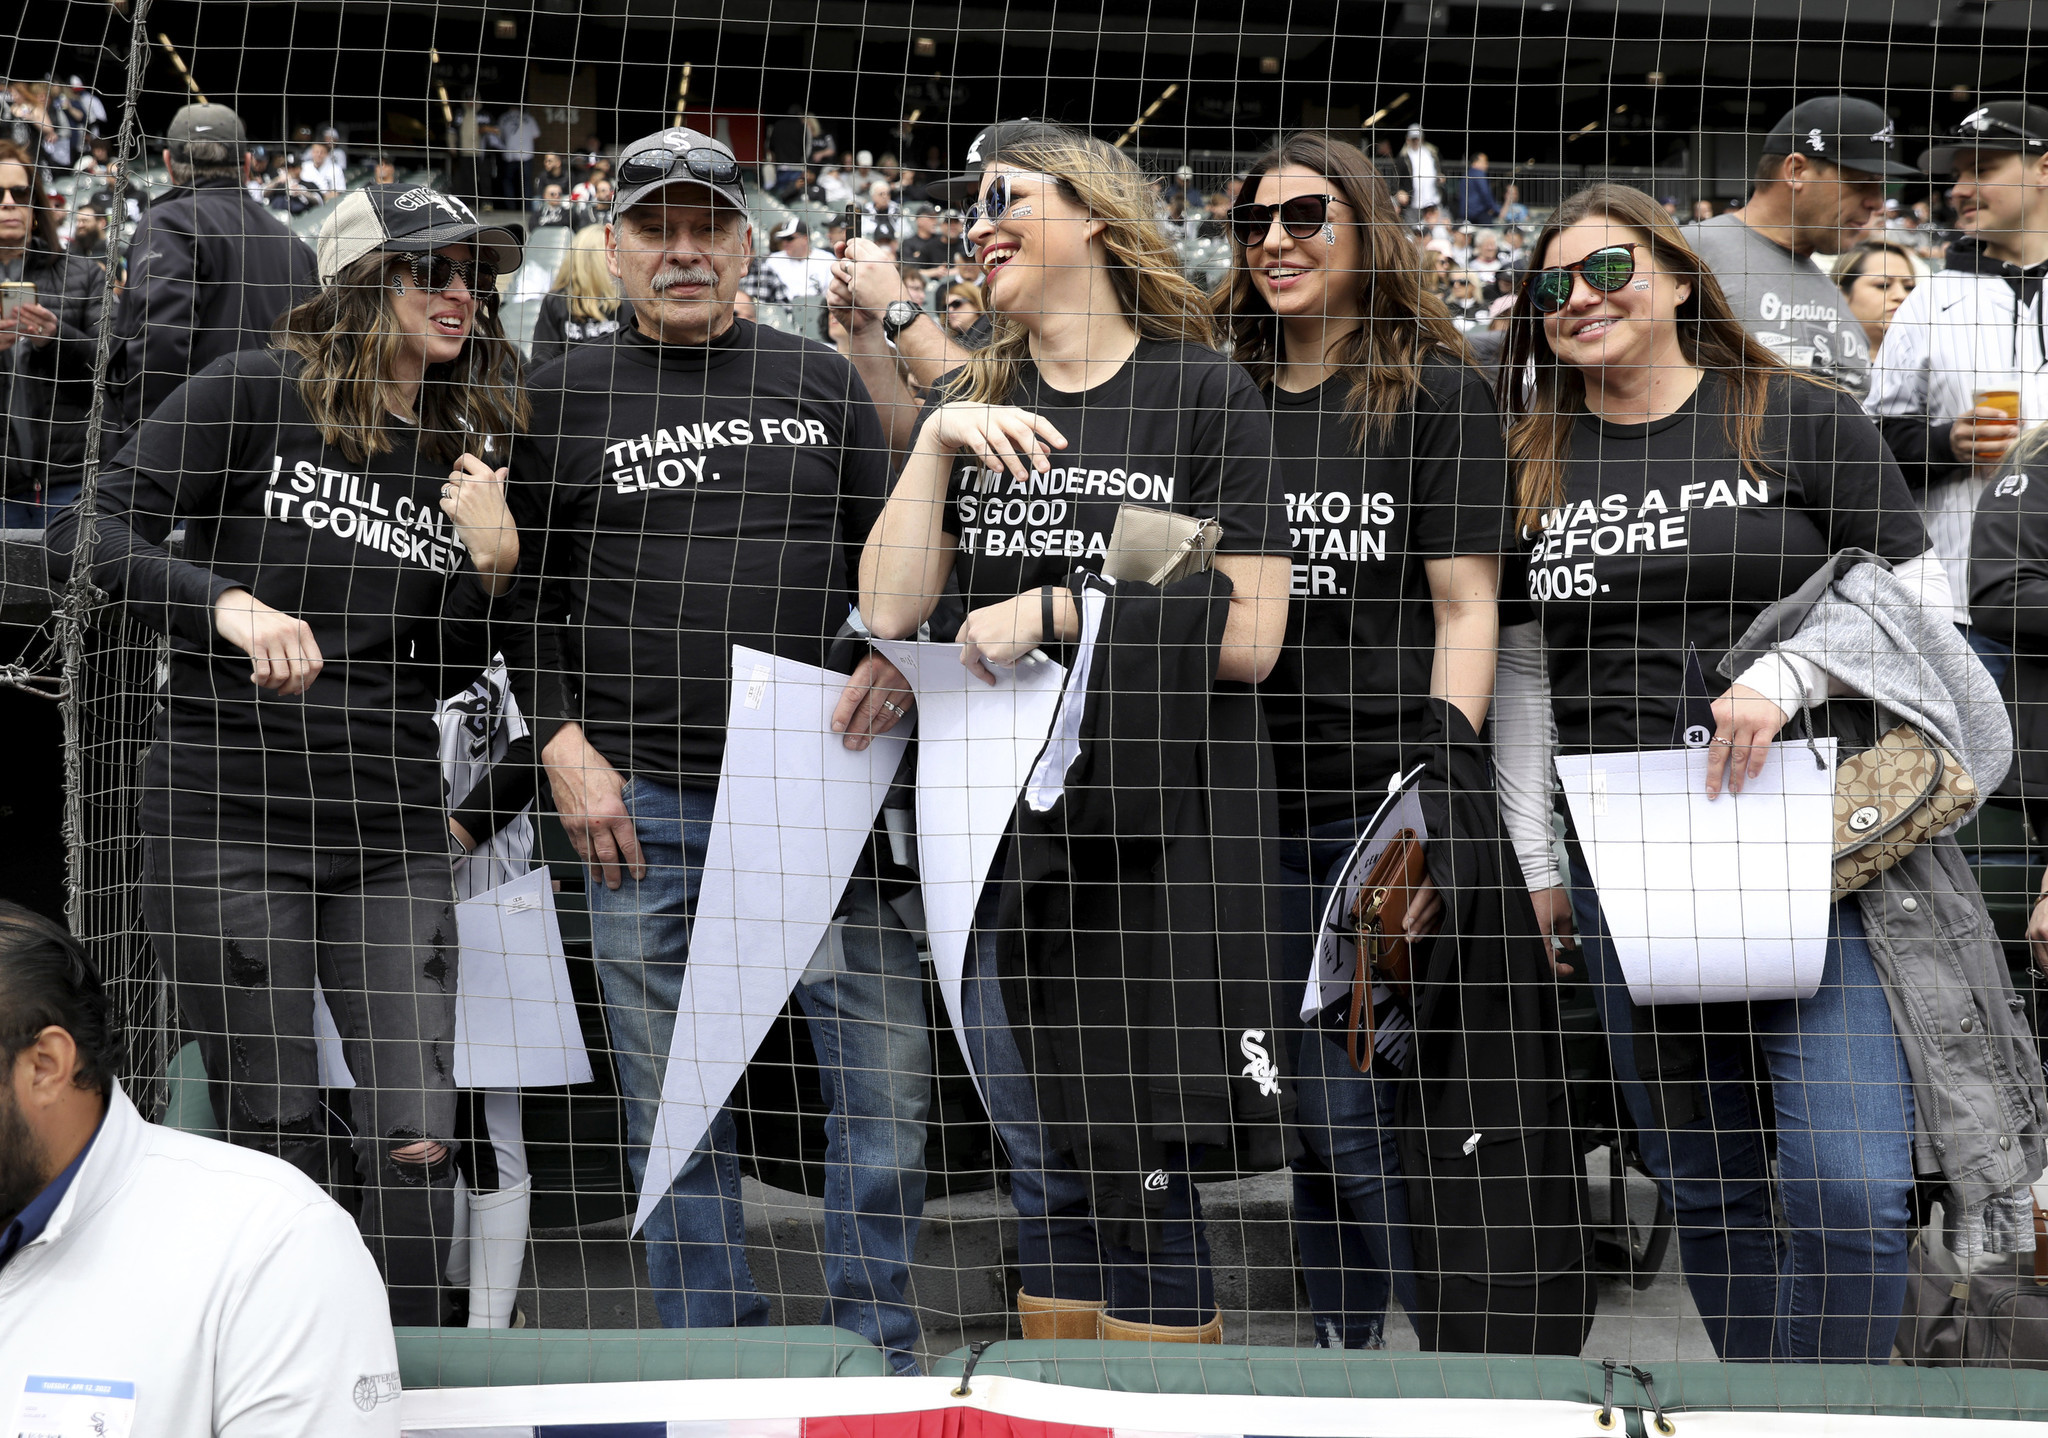 White Sox fans have high hopes for the team's future